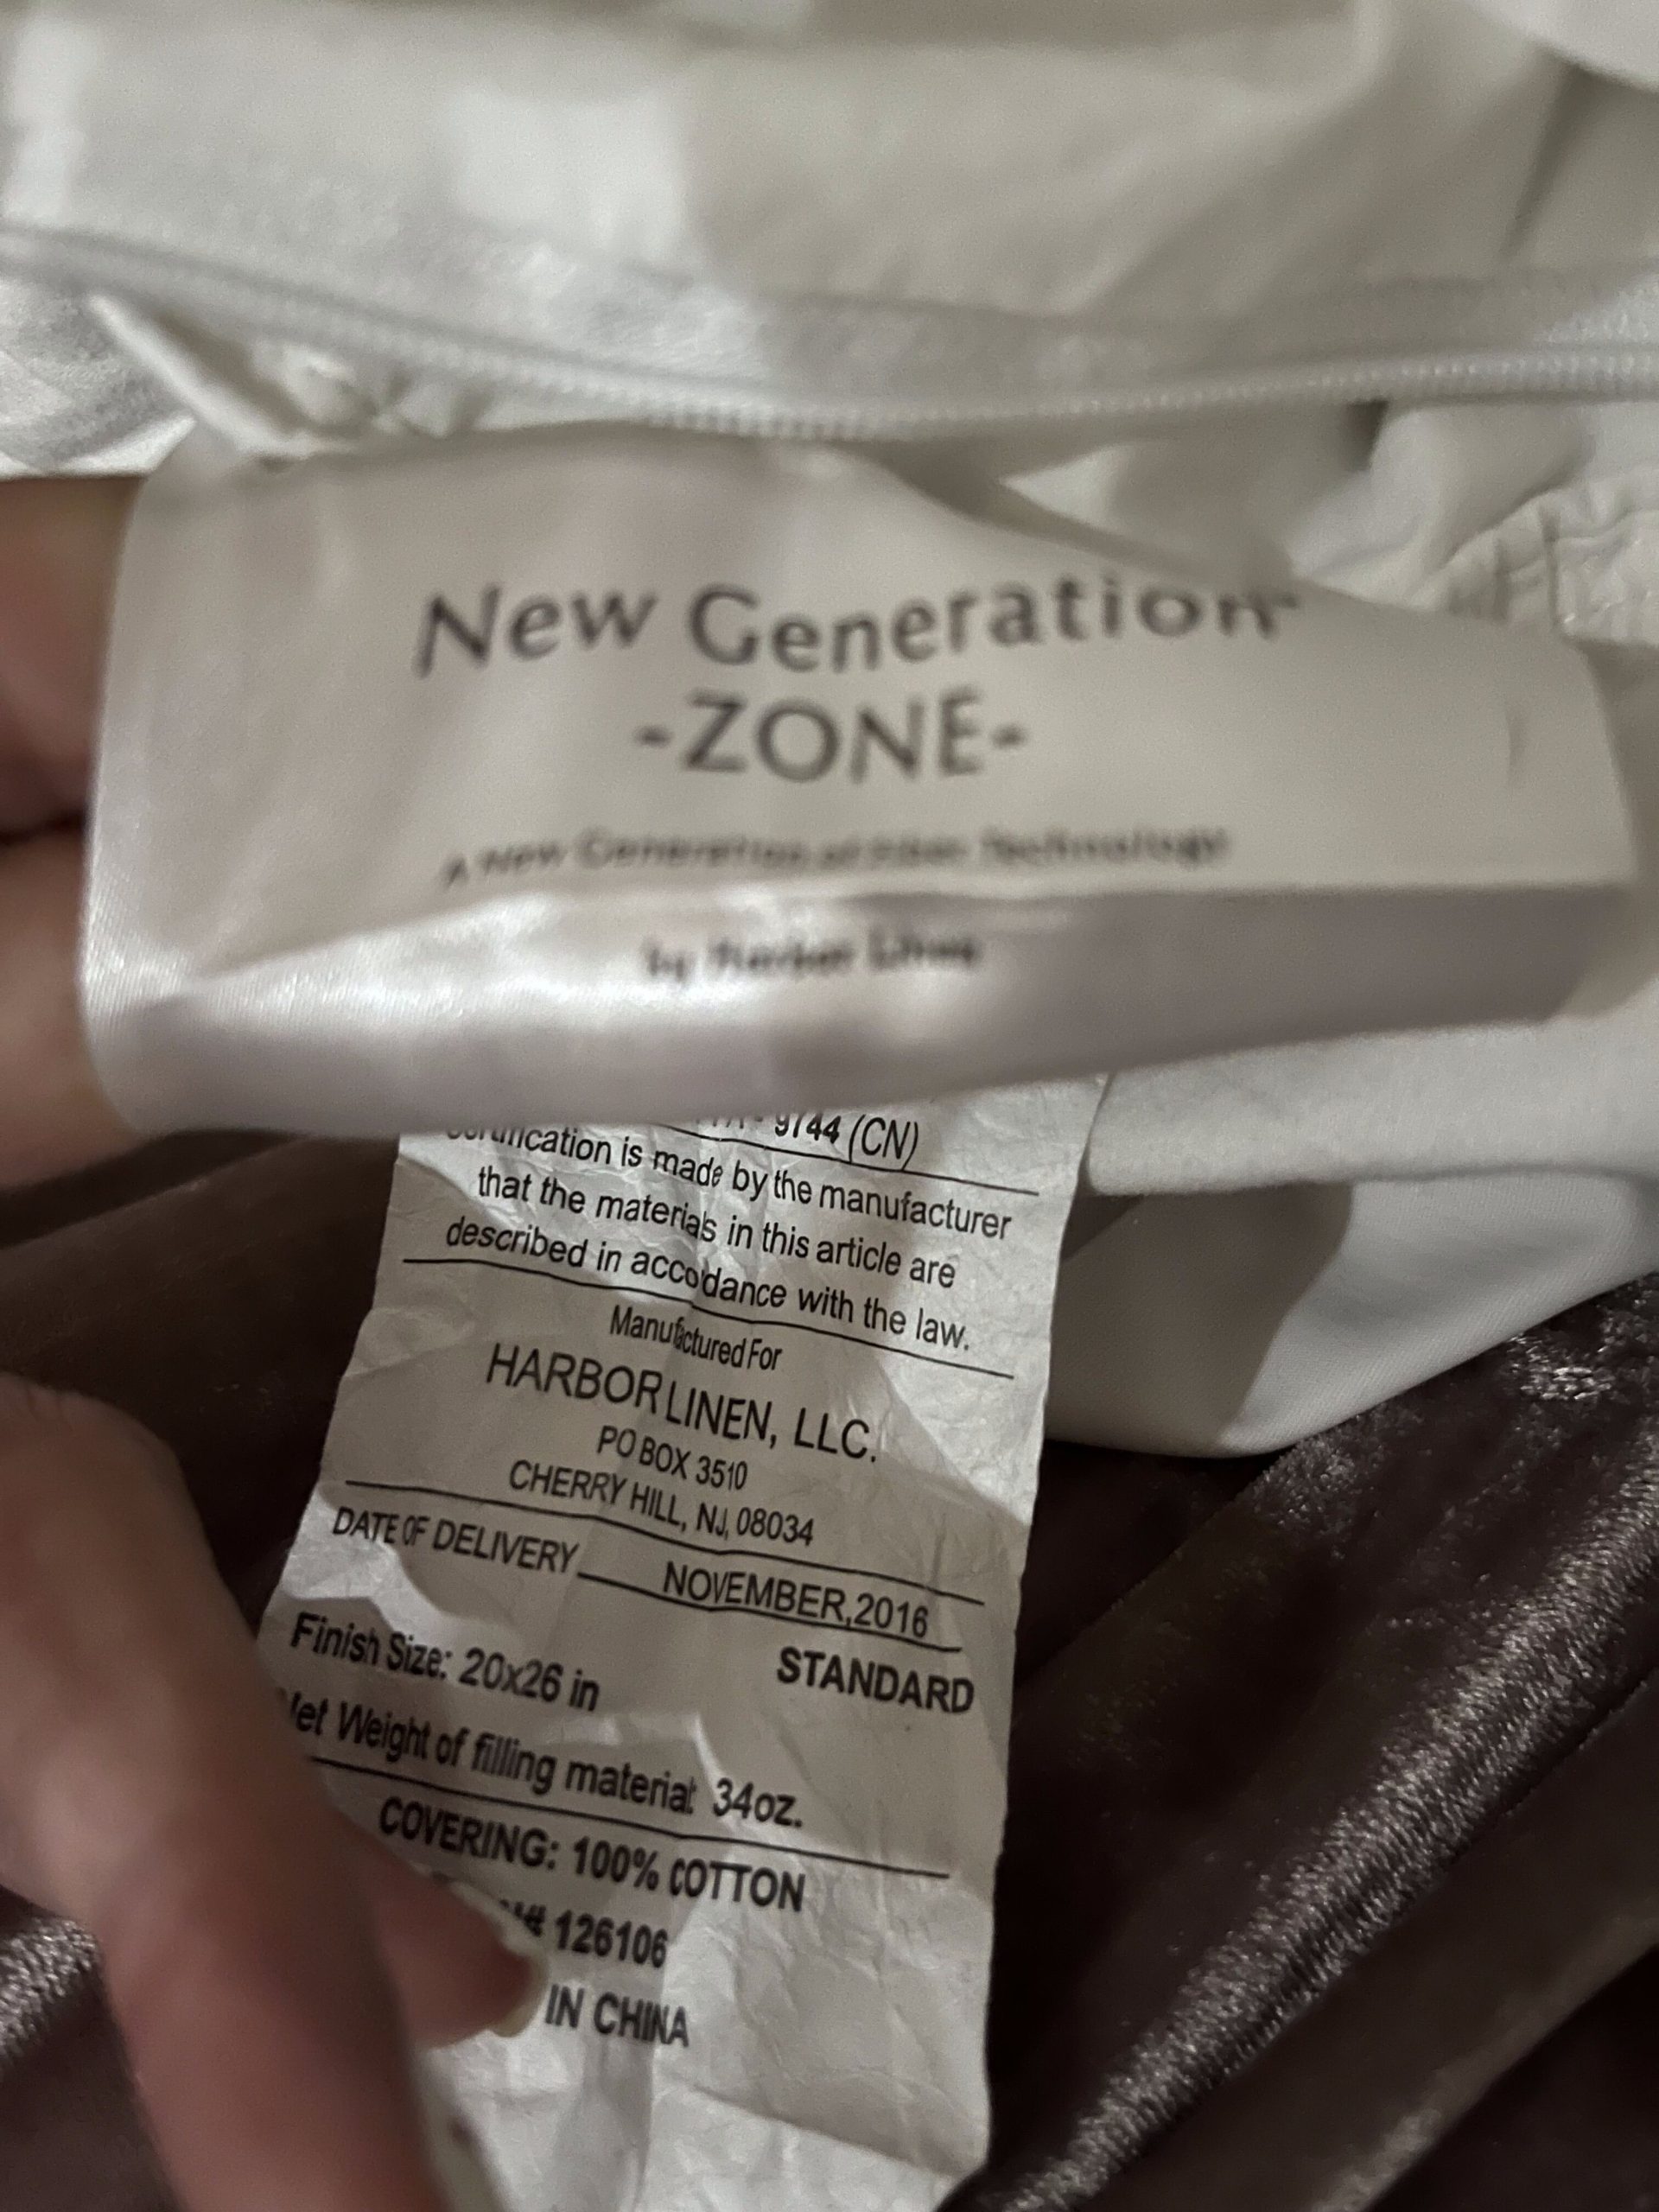 New Generation Zone (2pack) Pillow by Harbor Linen/TY Group